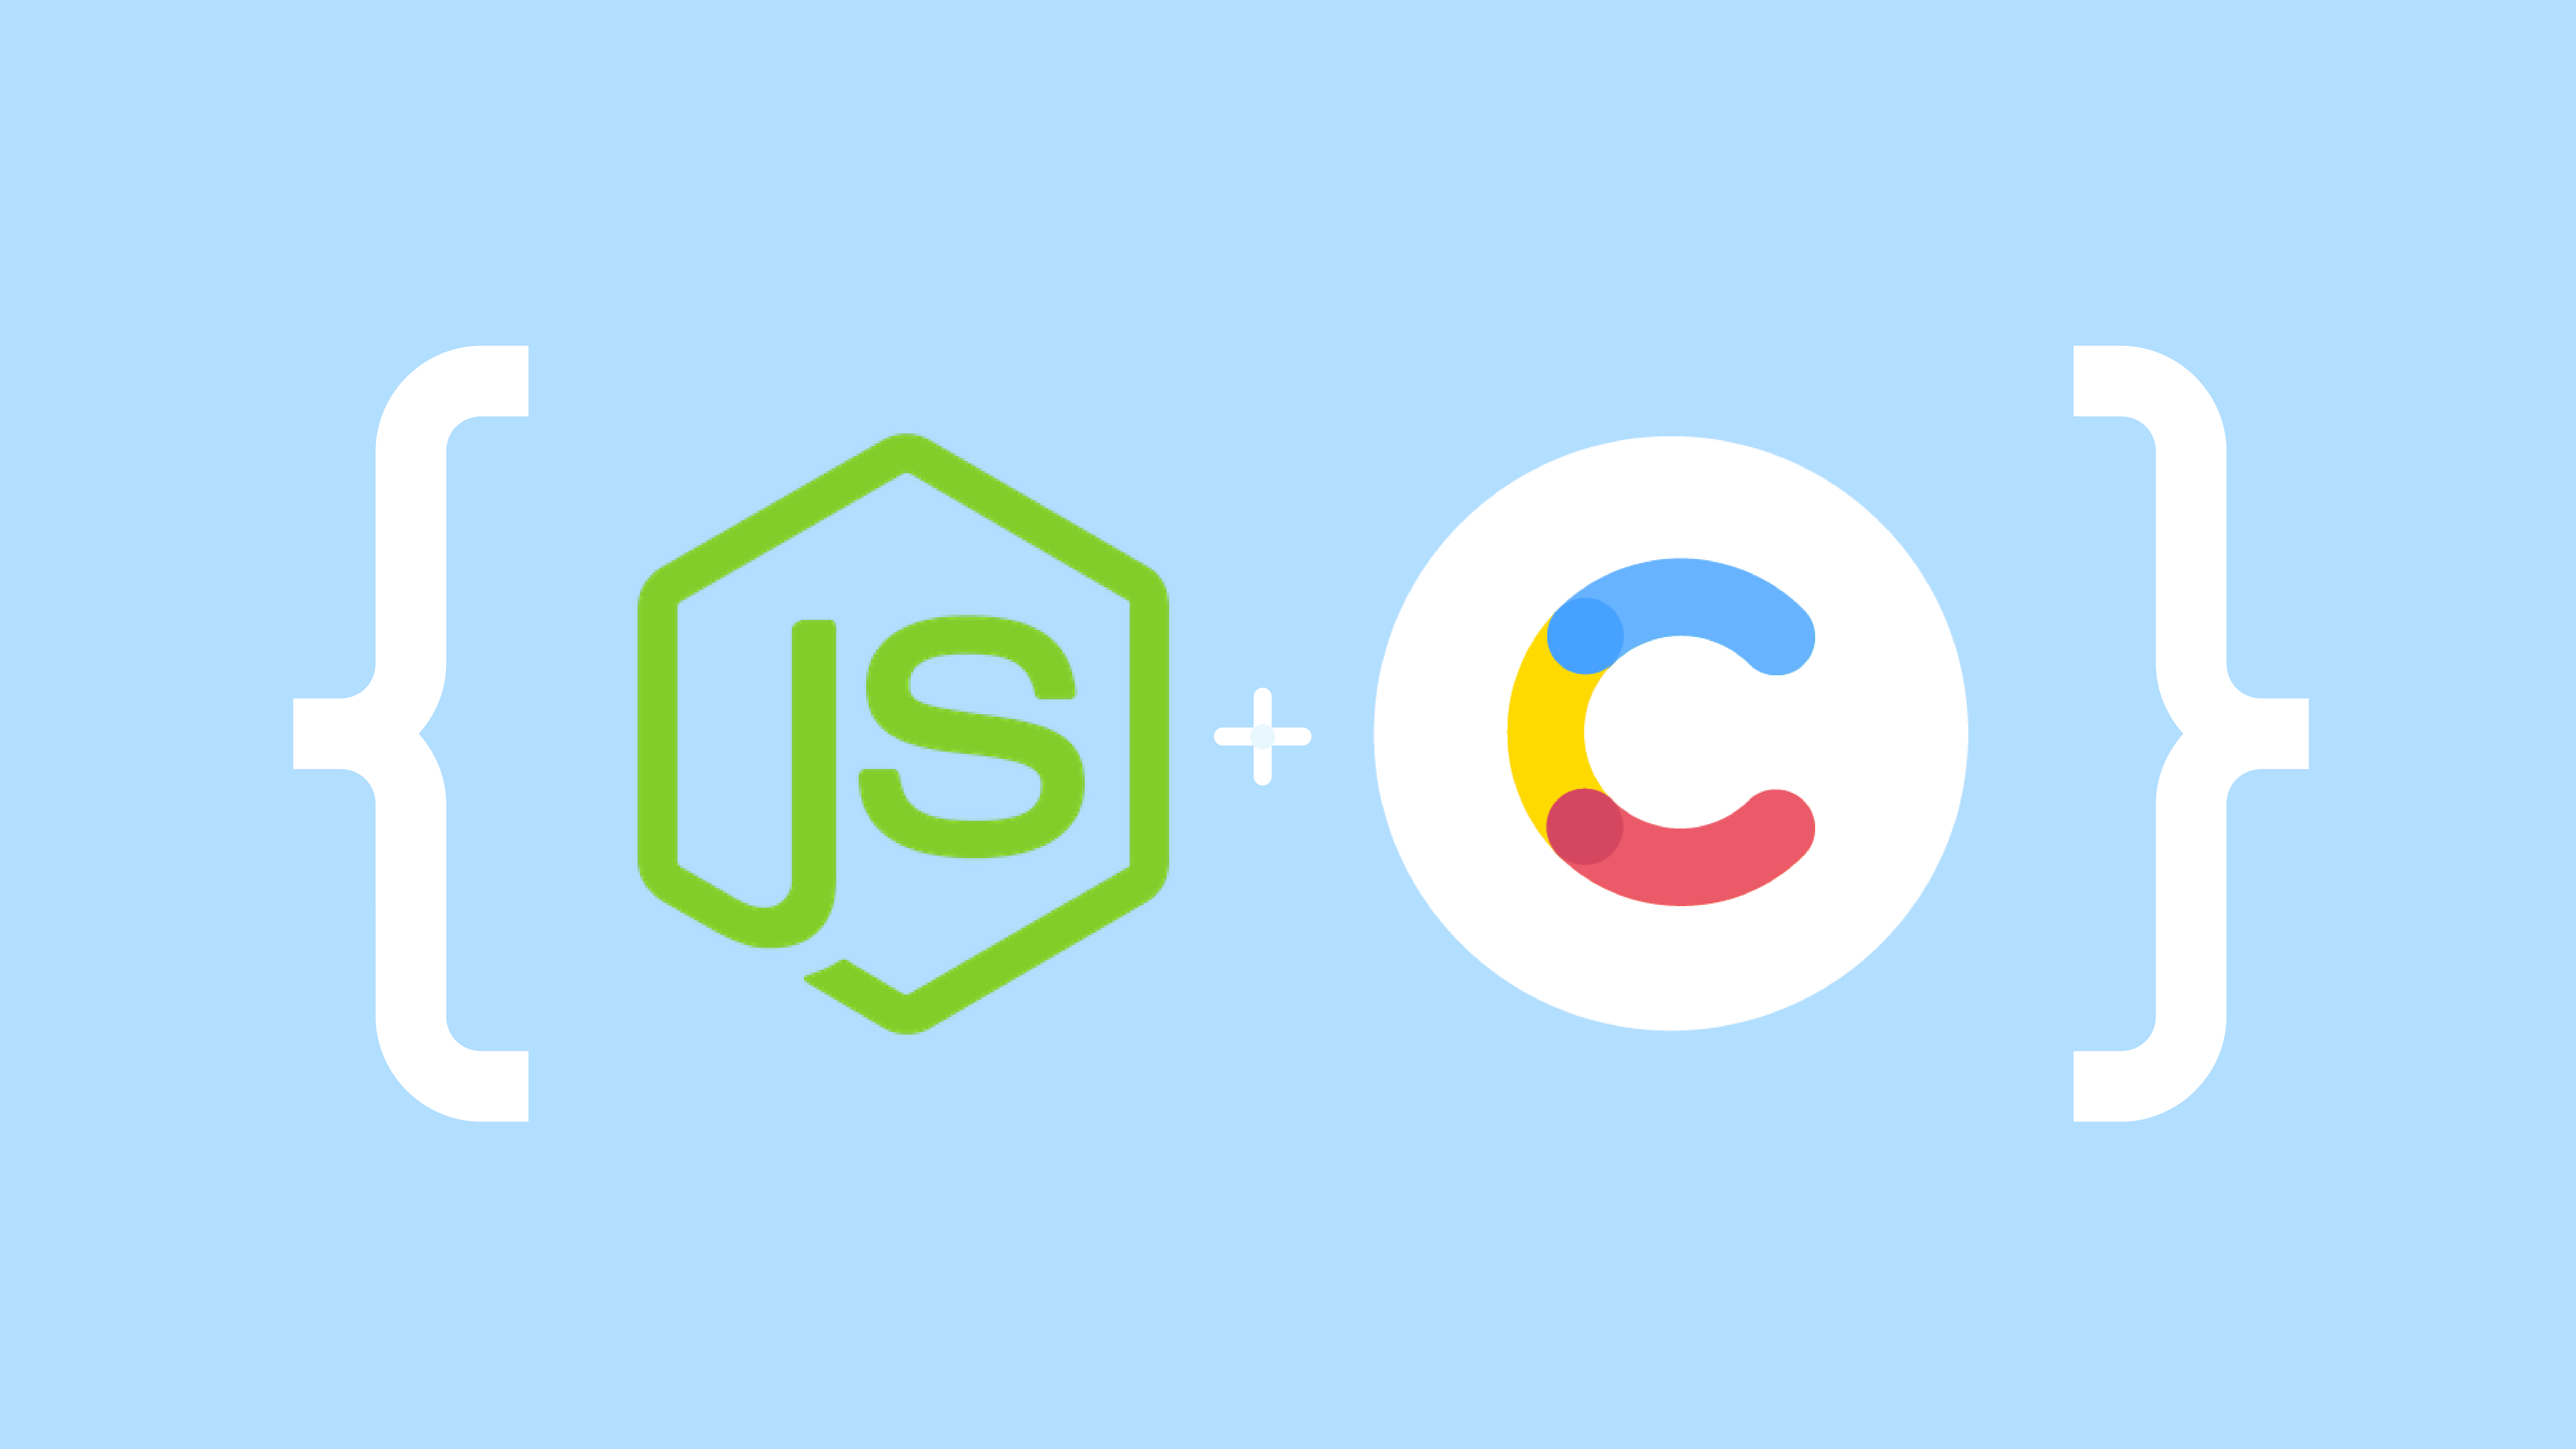 Logo icons for JavaScript and Node.js inside curly brackets